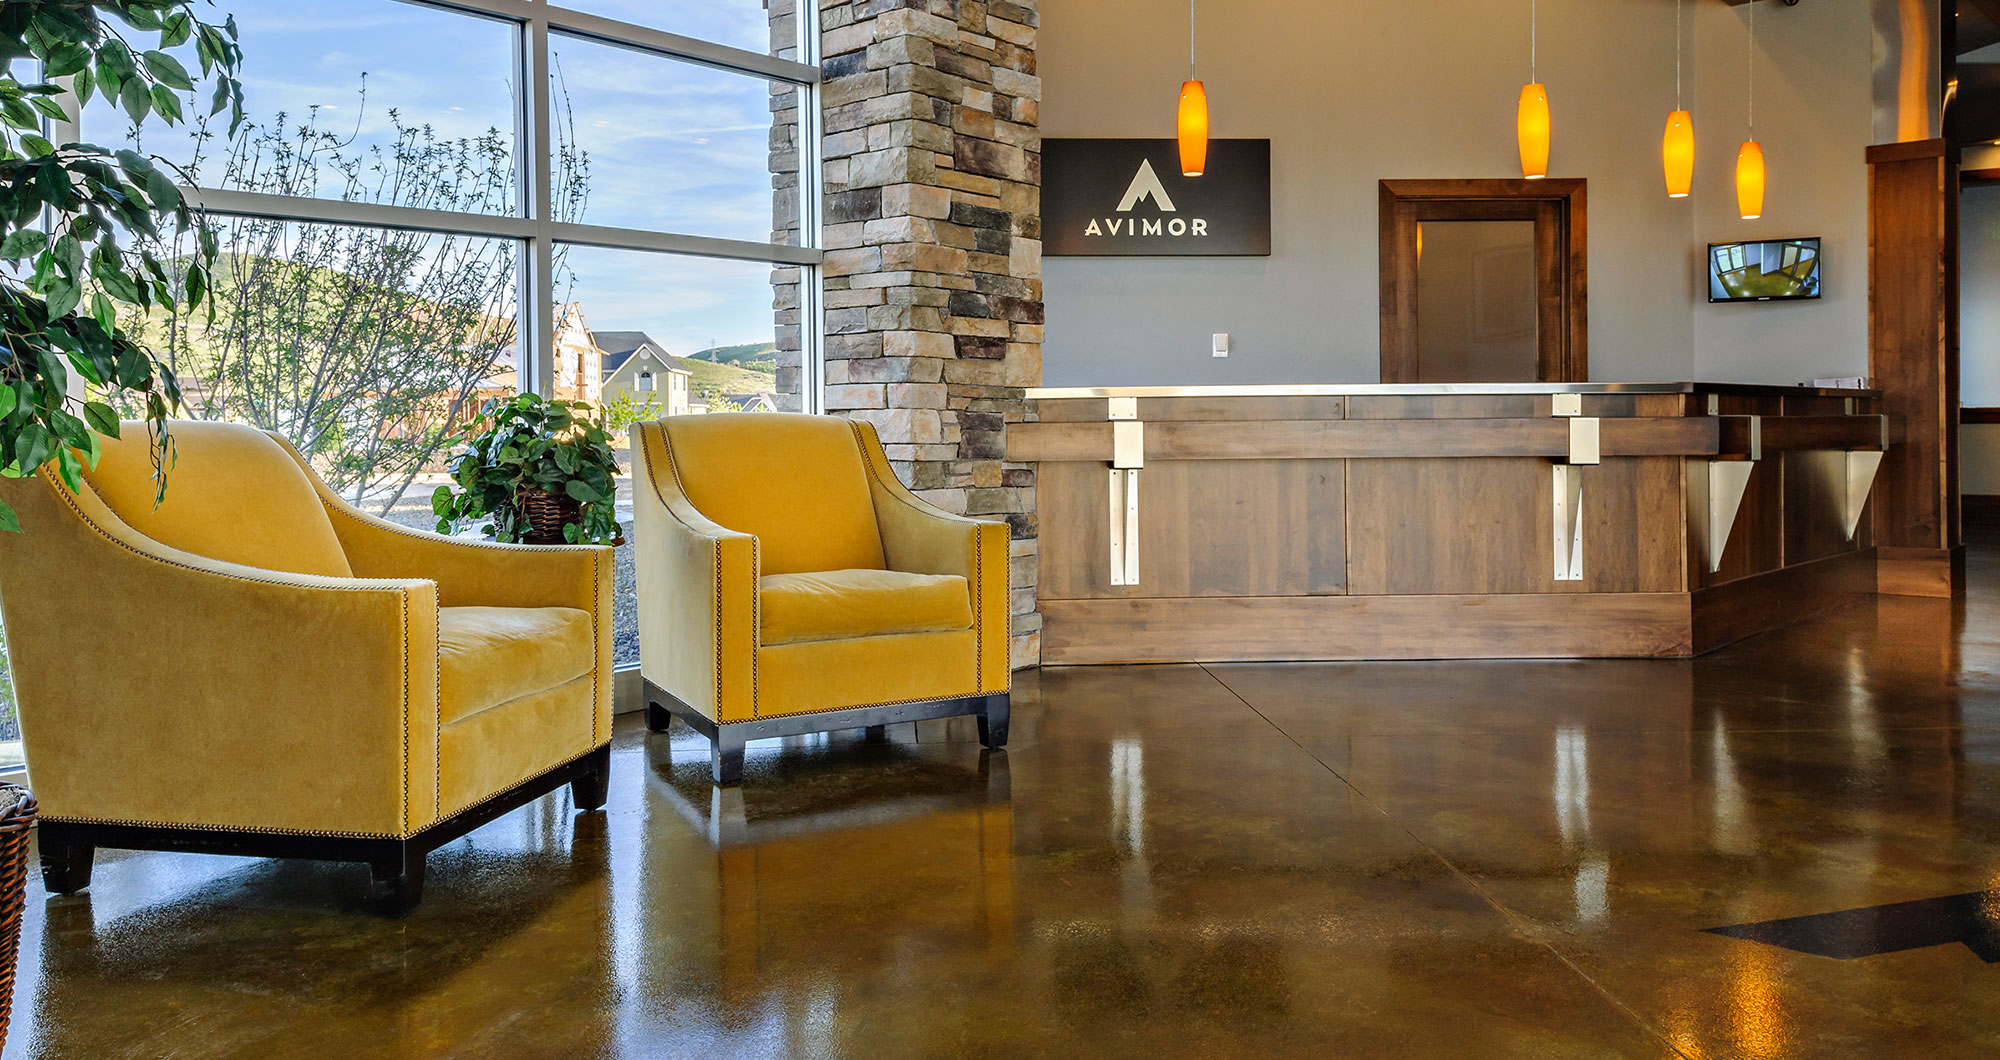 Avimor clubhouse and community center lobby with stone and hardwood finishes